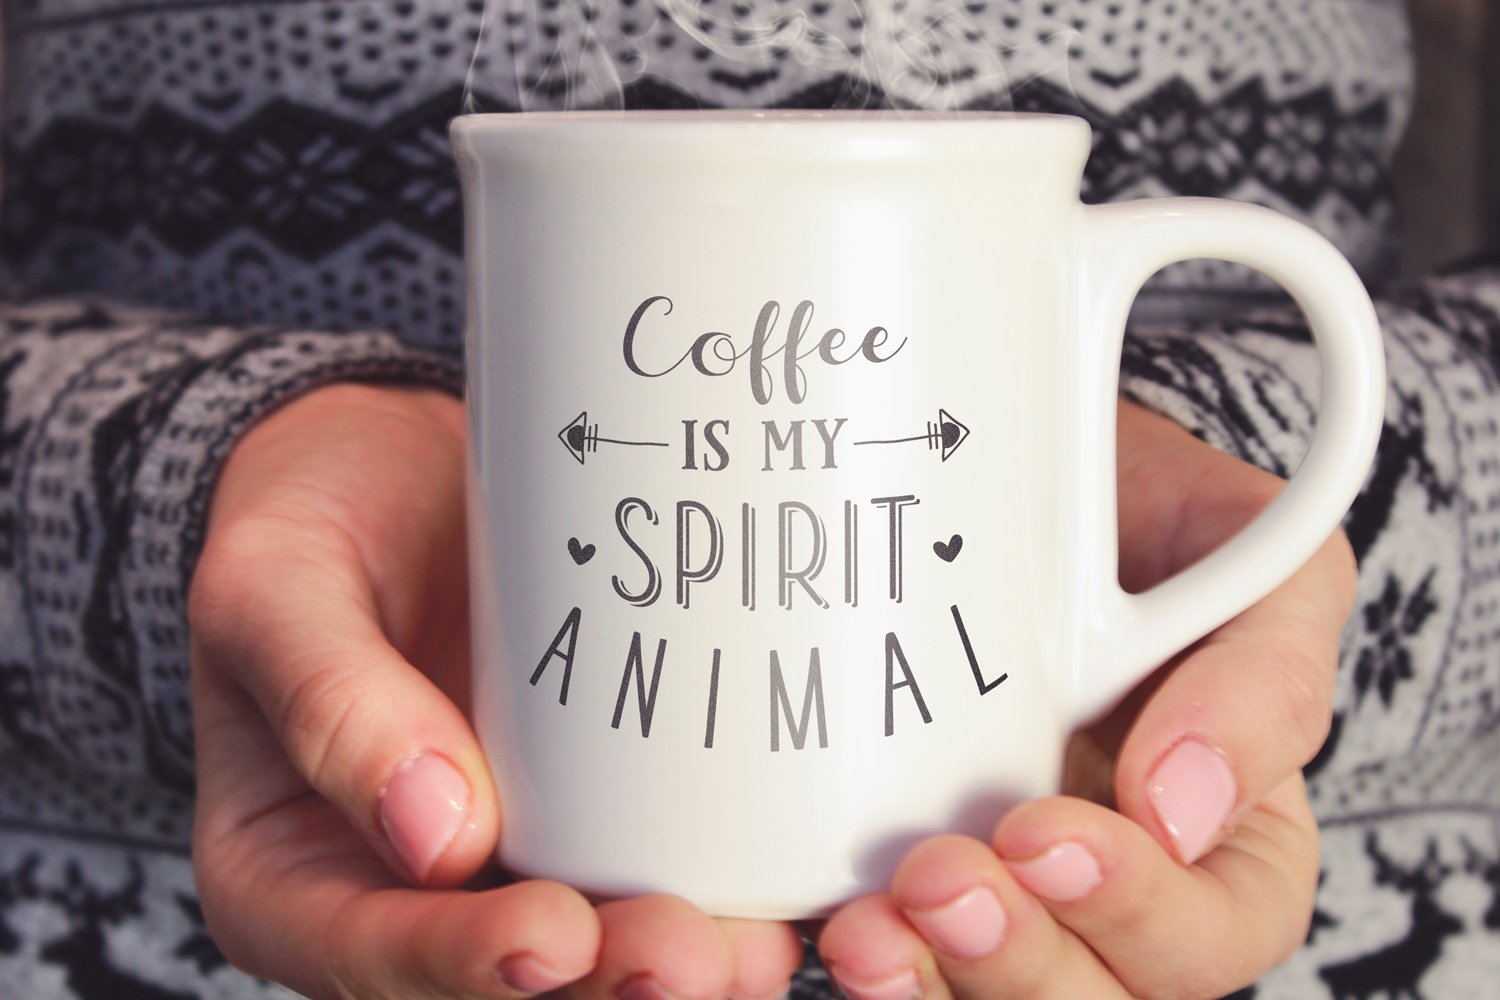 Use this cup for your coffee quote.